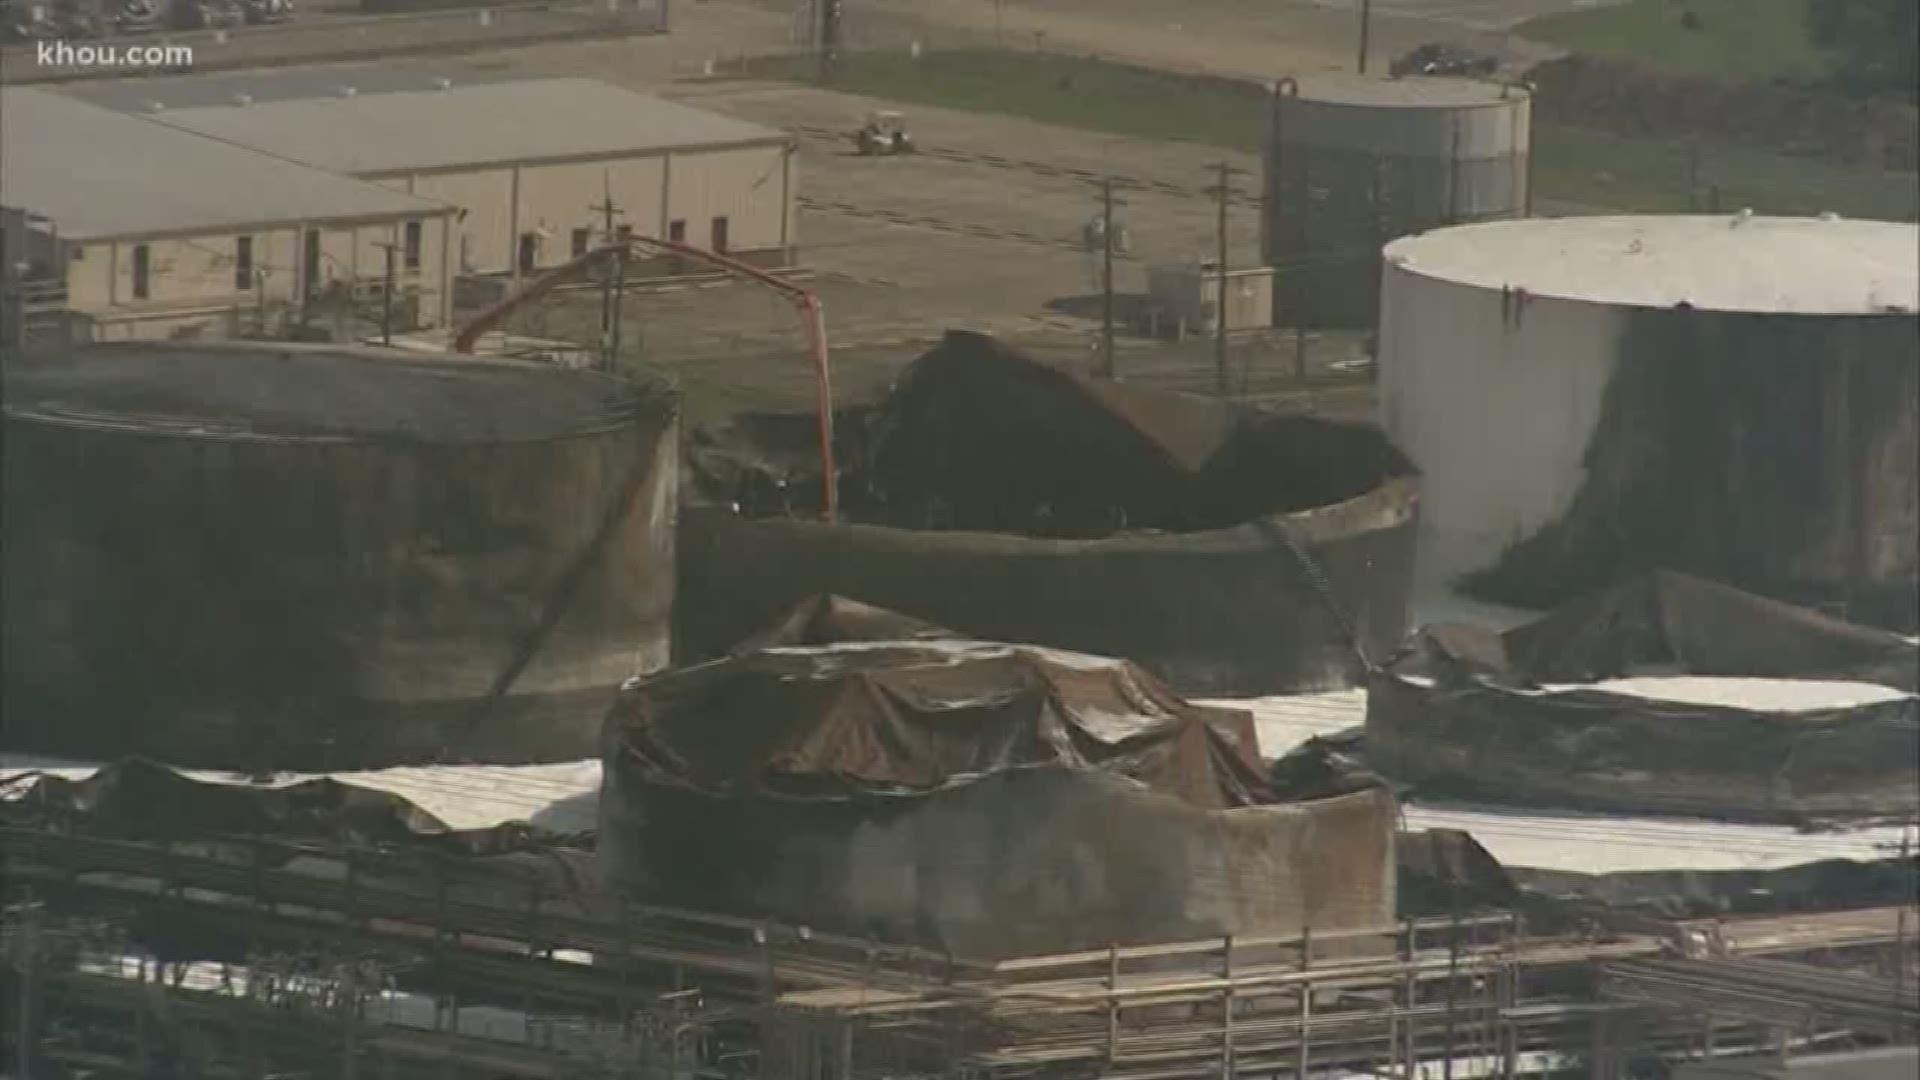 The U.S. Coast Guard officials say Sunday’s storms had little to no impact on their recovery efforts in the Ship Channel following the tank fire at the Intercontinental Terminals Co. Deer Park facility.